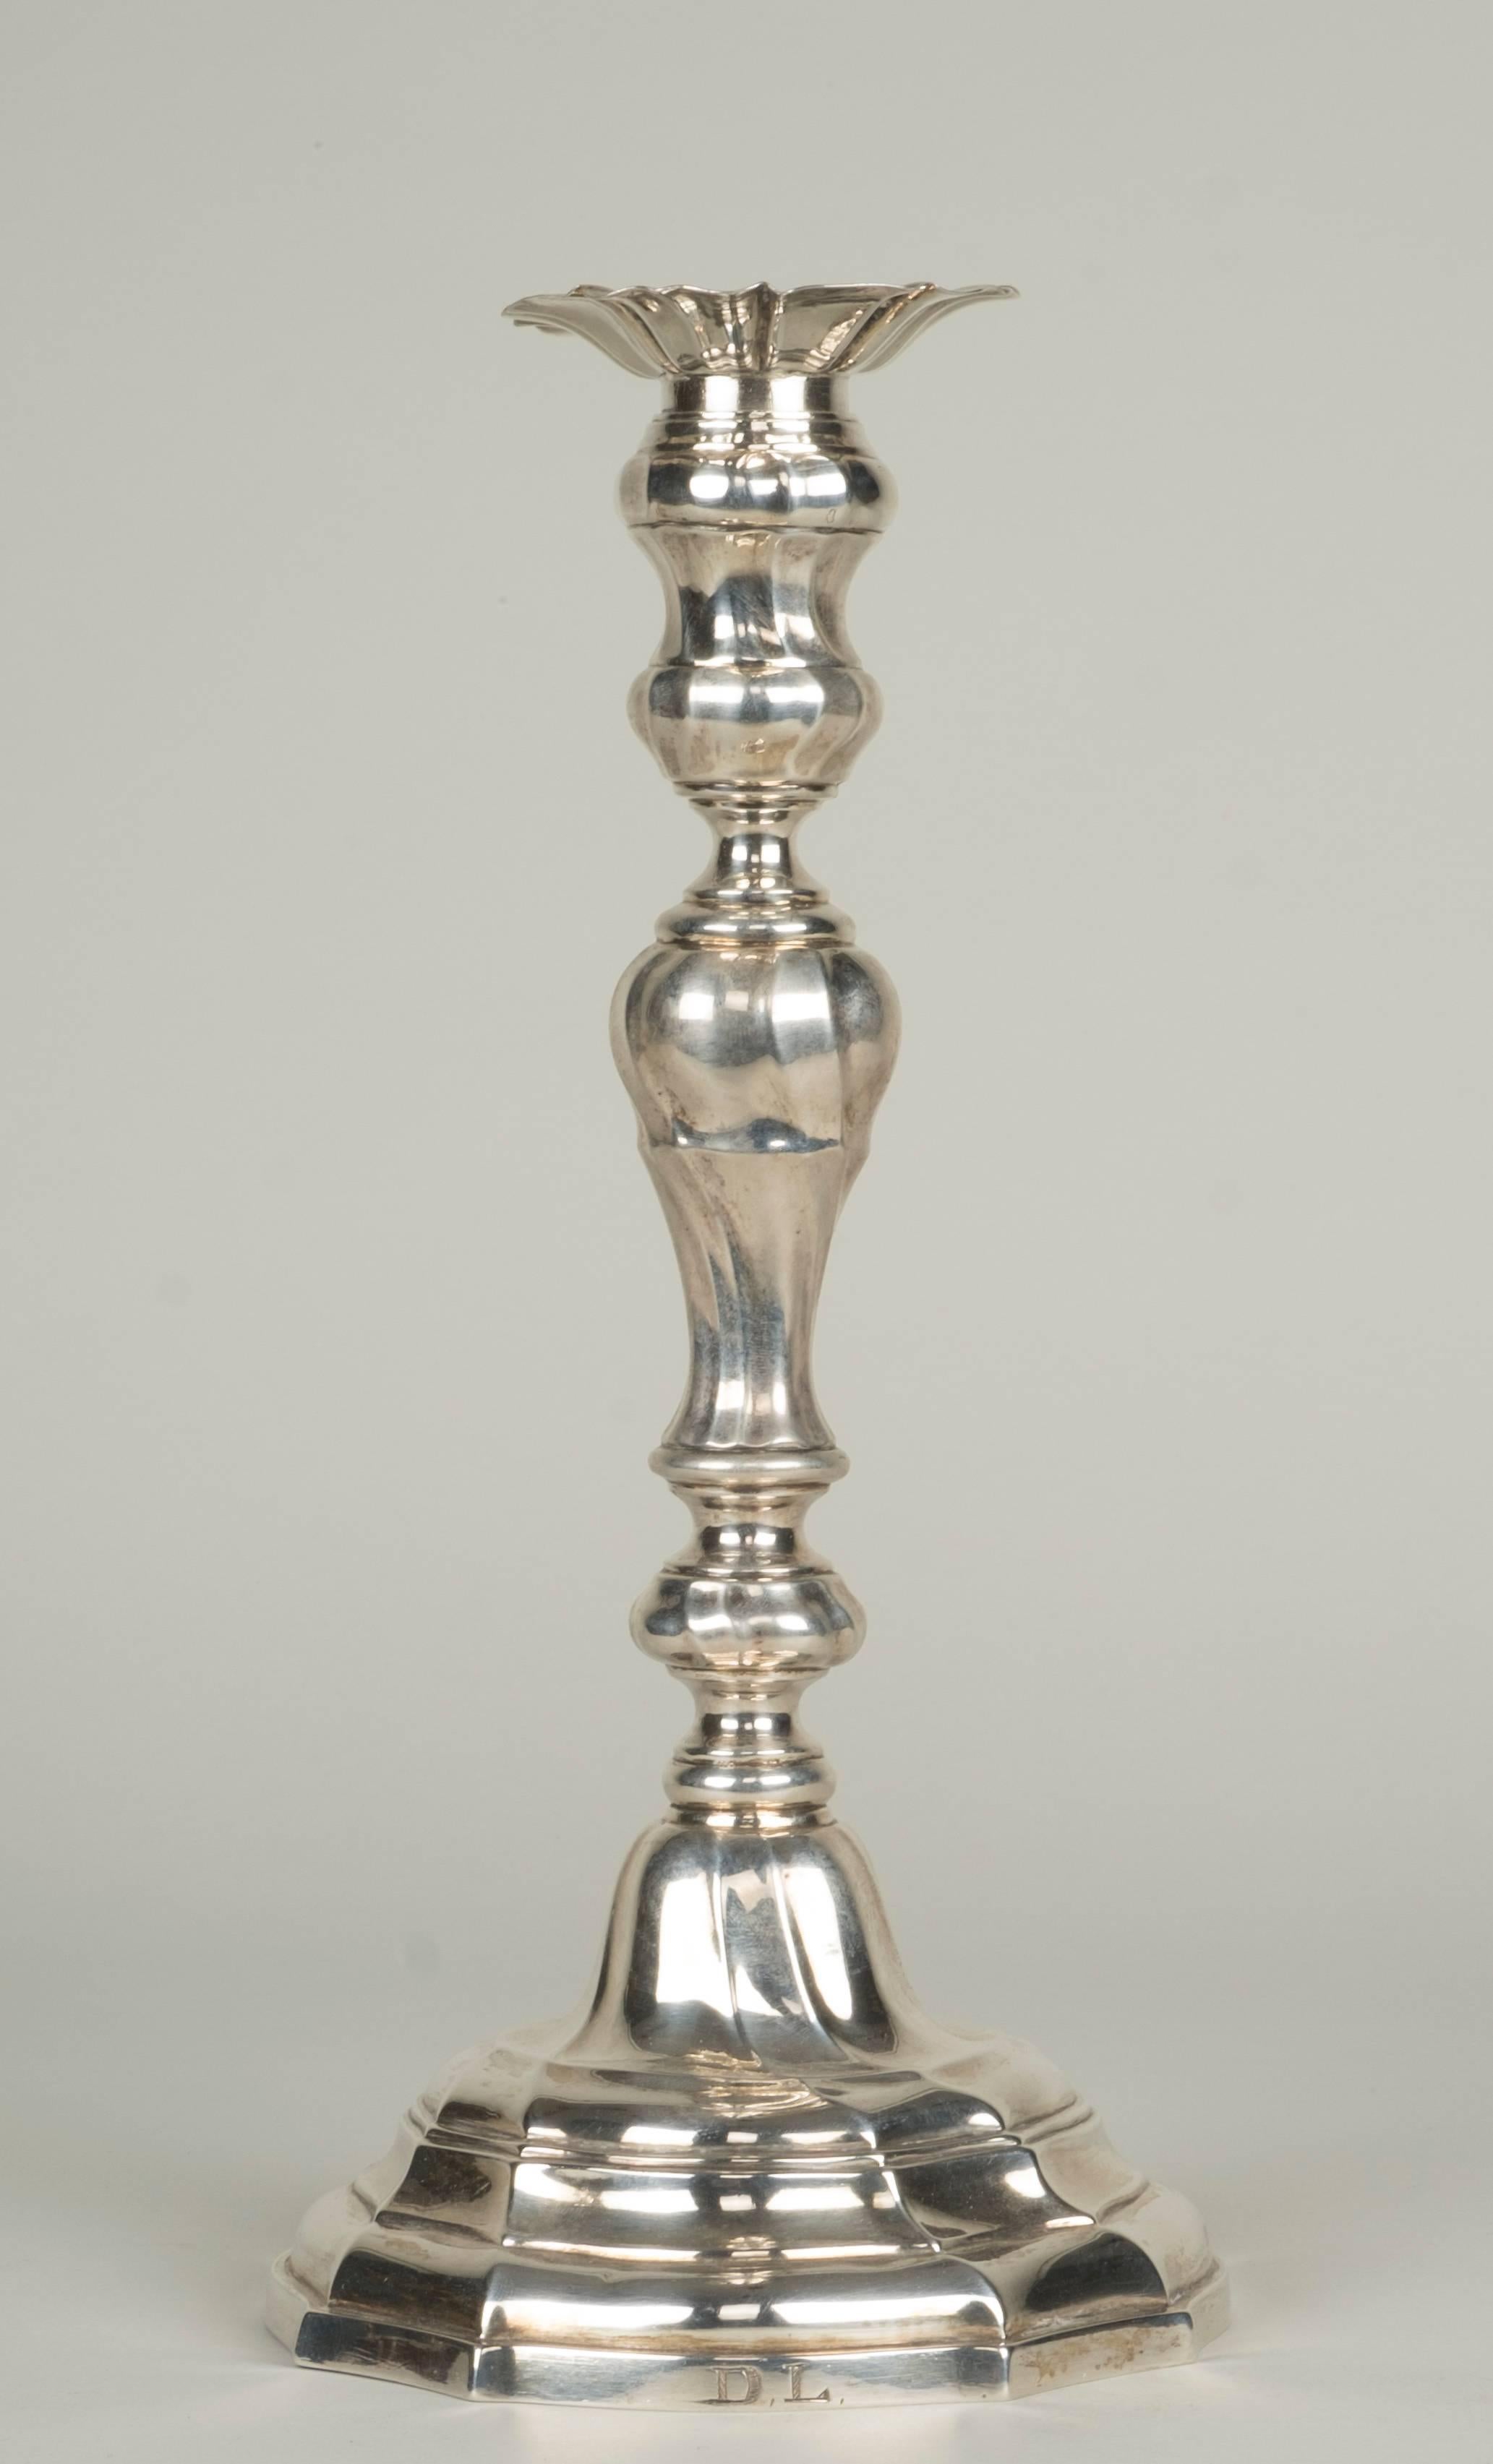 Pair of silver candlesticks
Belgian work from the second half of the 18th century, Master-Goldsmith: ATH
Dimensions:
27.5 cm H x 13.5 cm D
Weight:
450 g.